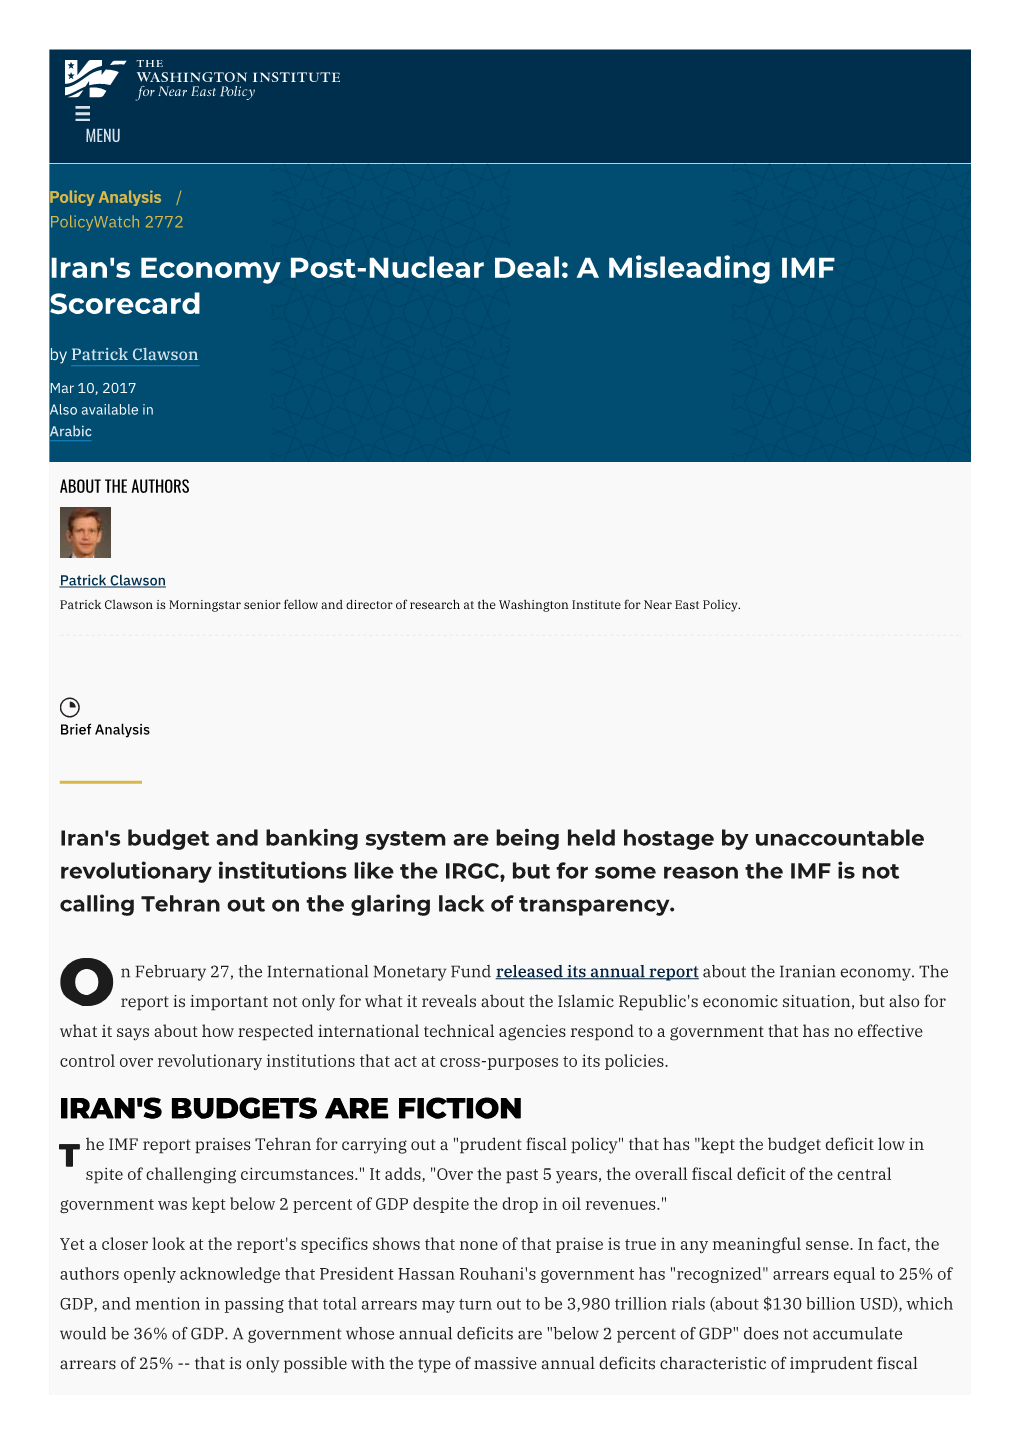 Iran's Economy Post-Nuclear Deal: a Misleading IMF Scorecard by Patrick Clawson